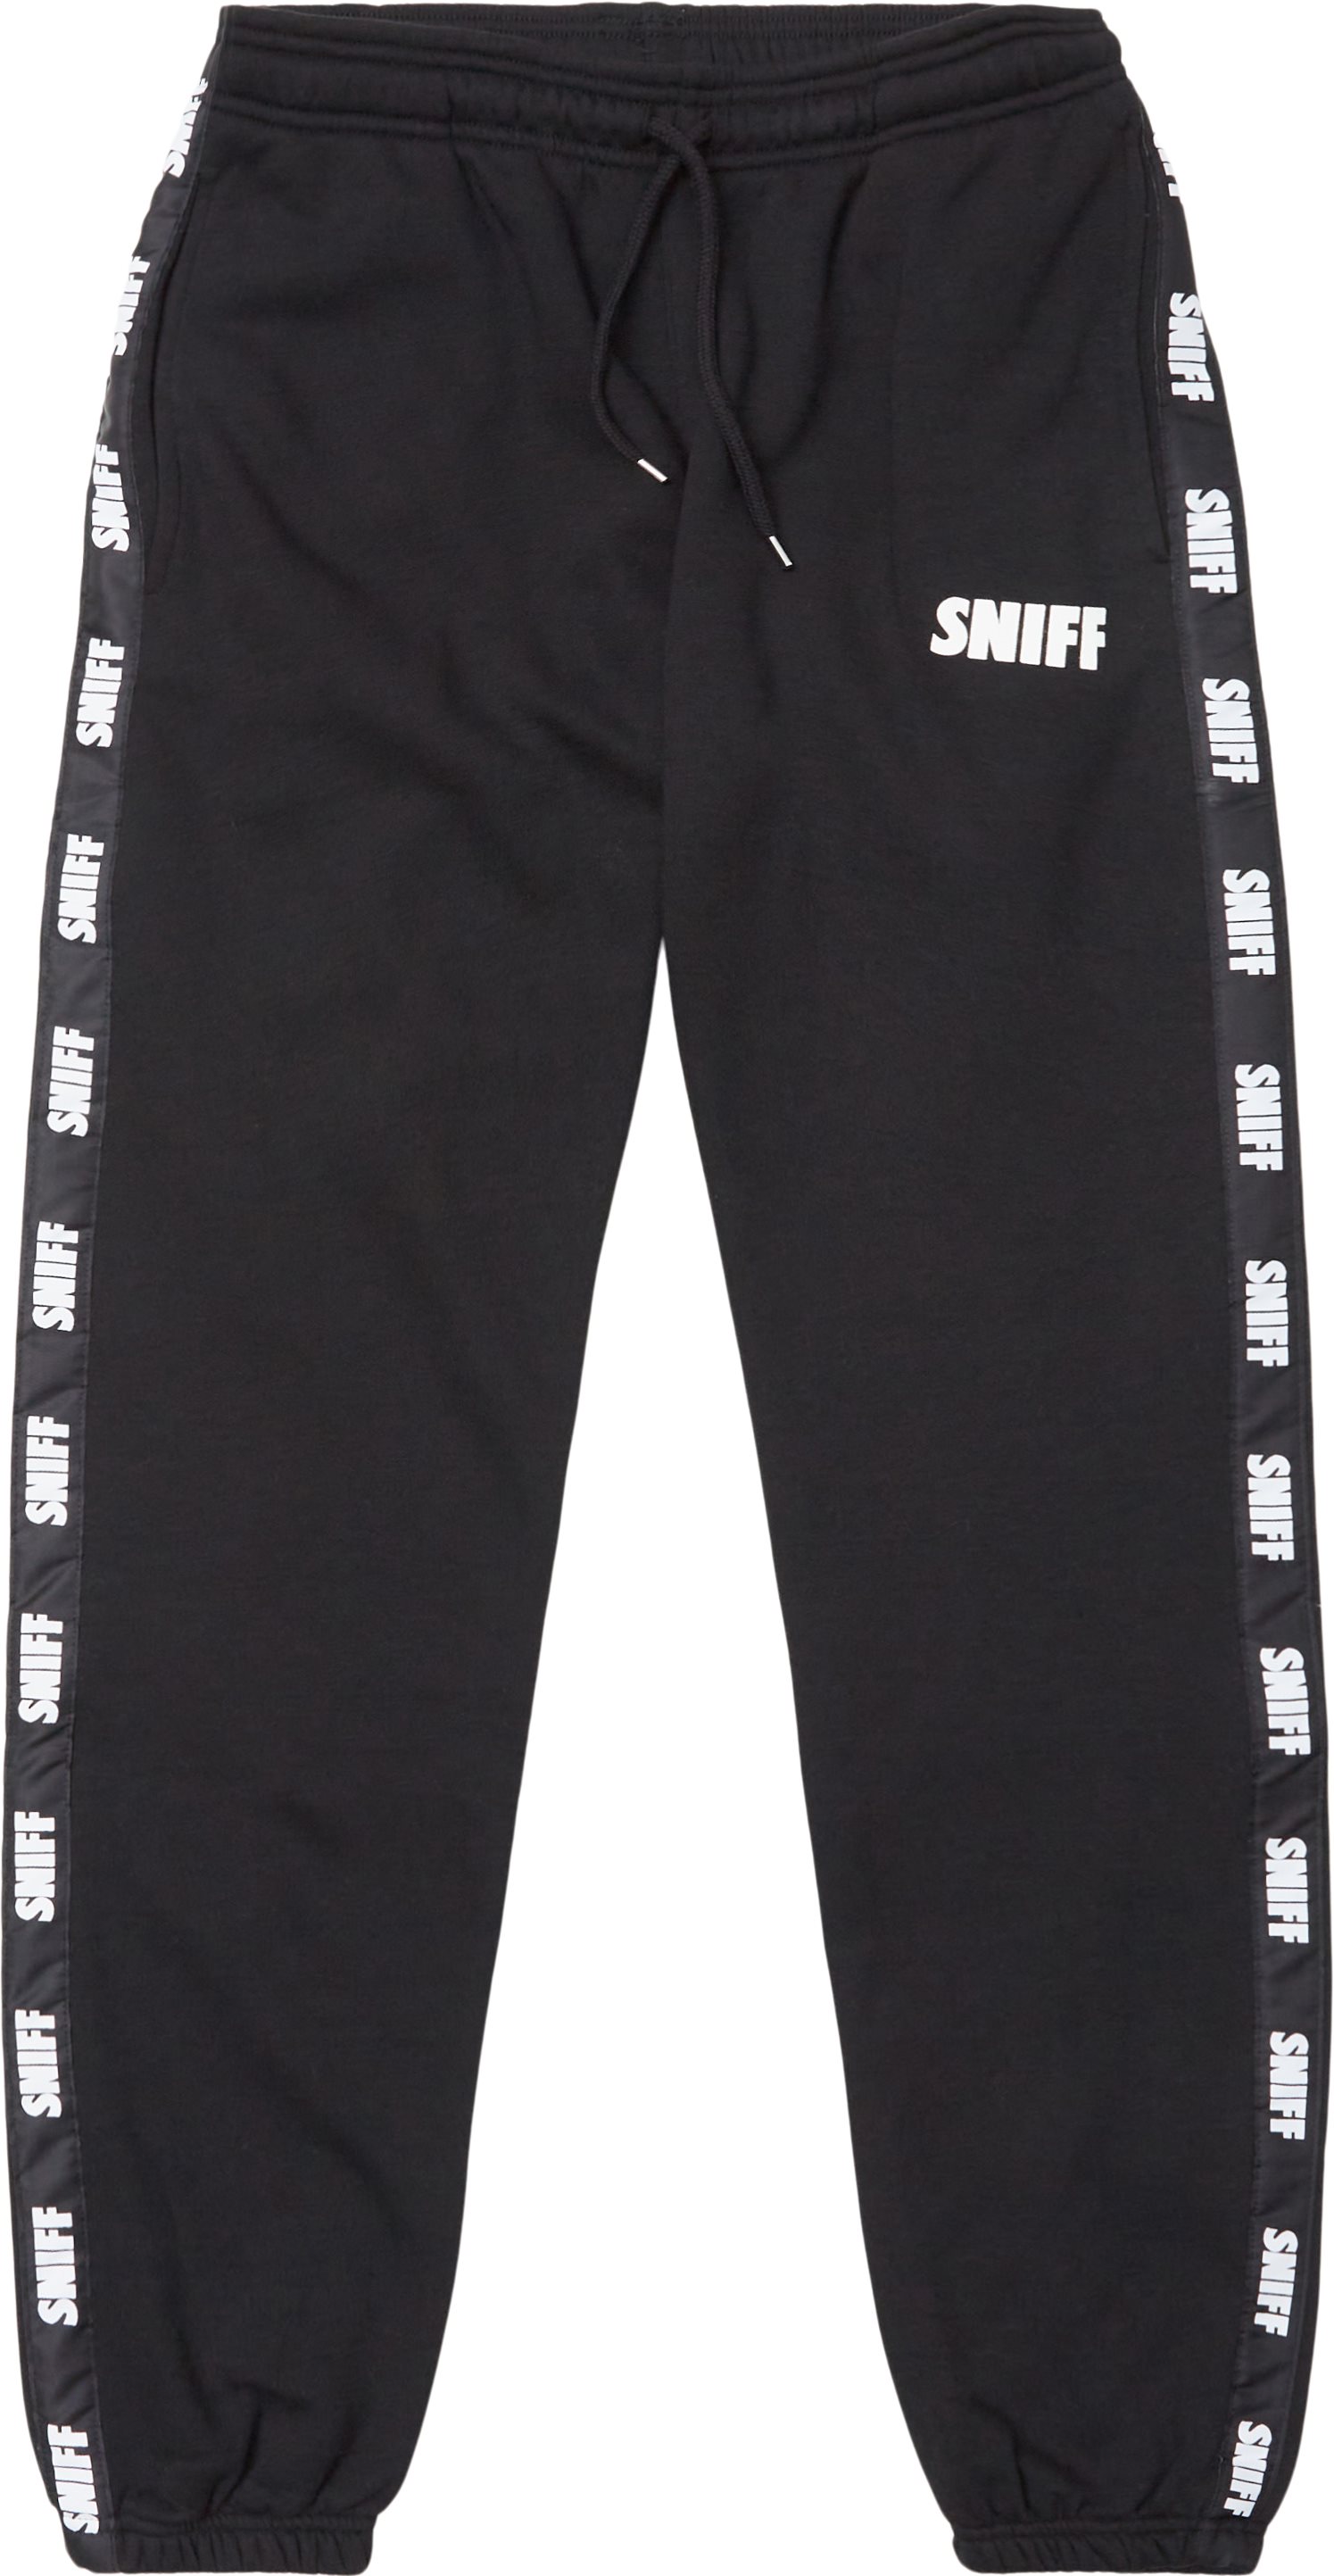 Sniff Trousers WOLF Black